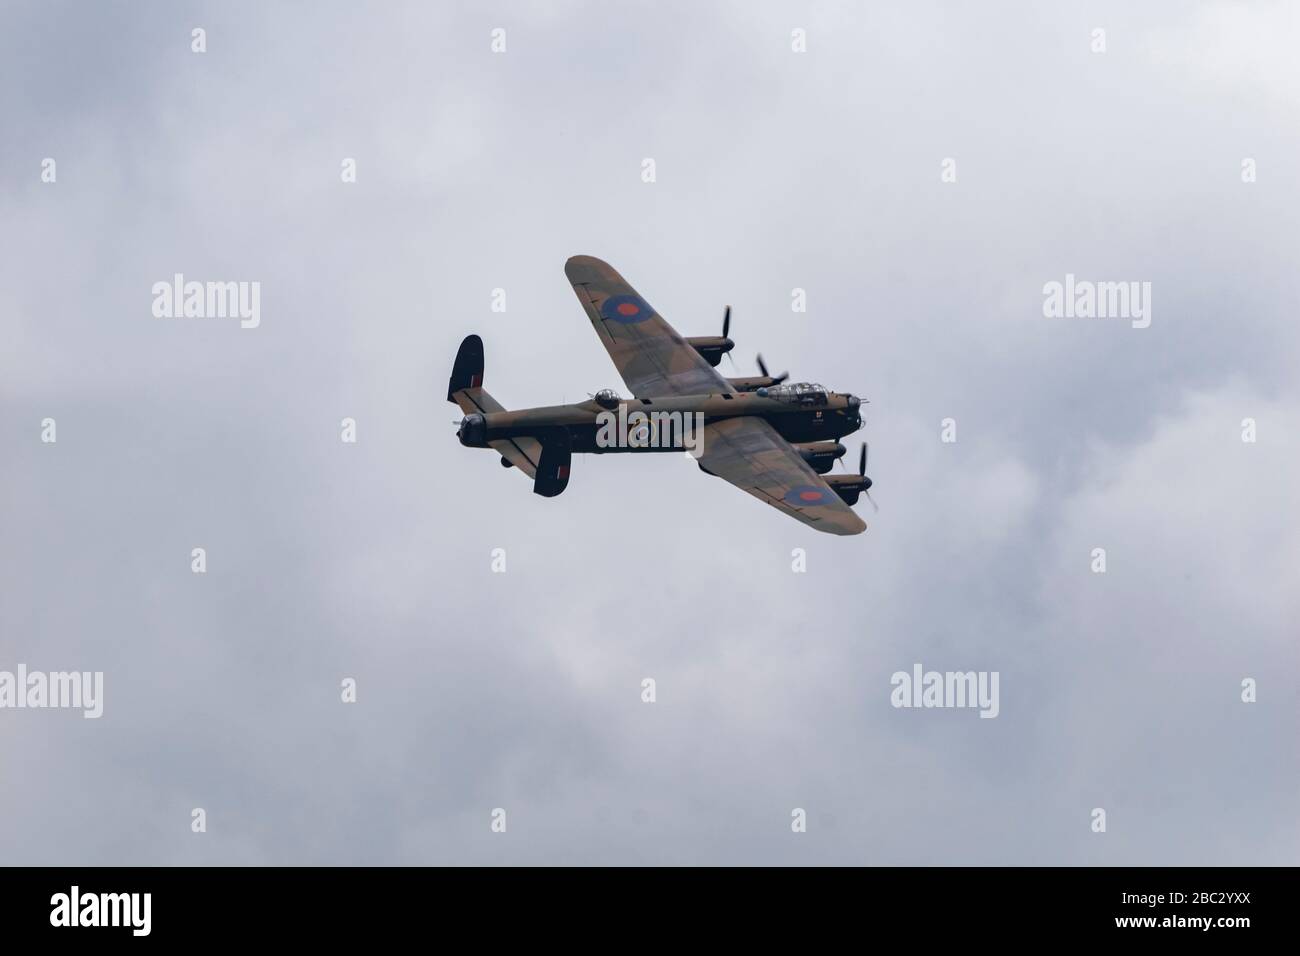 Lancaster Bomber plane flying in air display Stock Photo